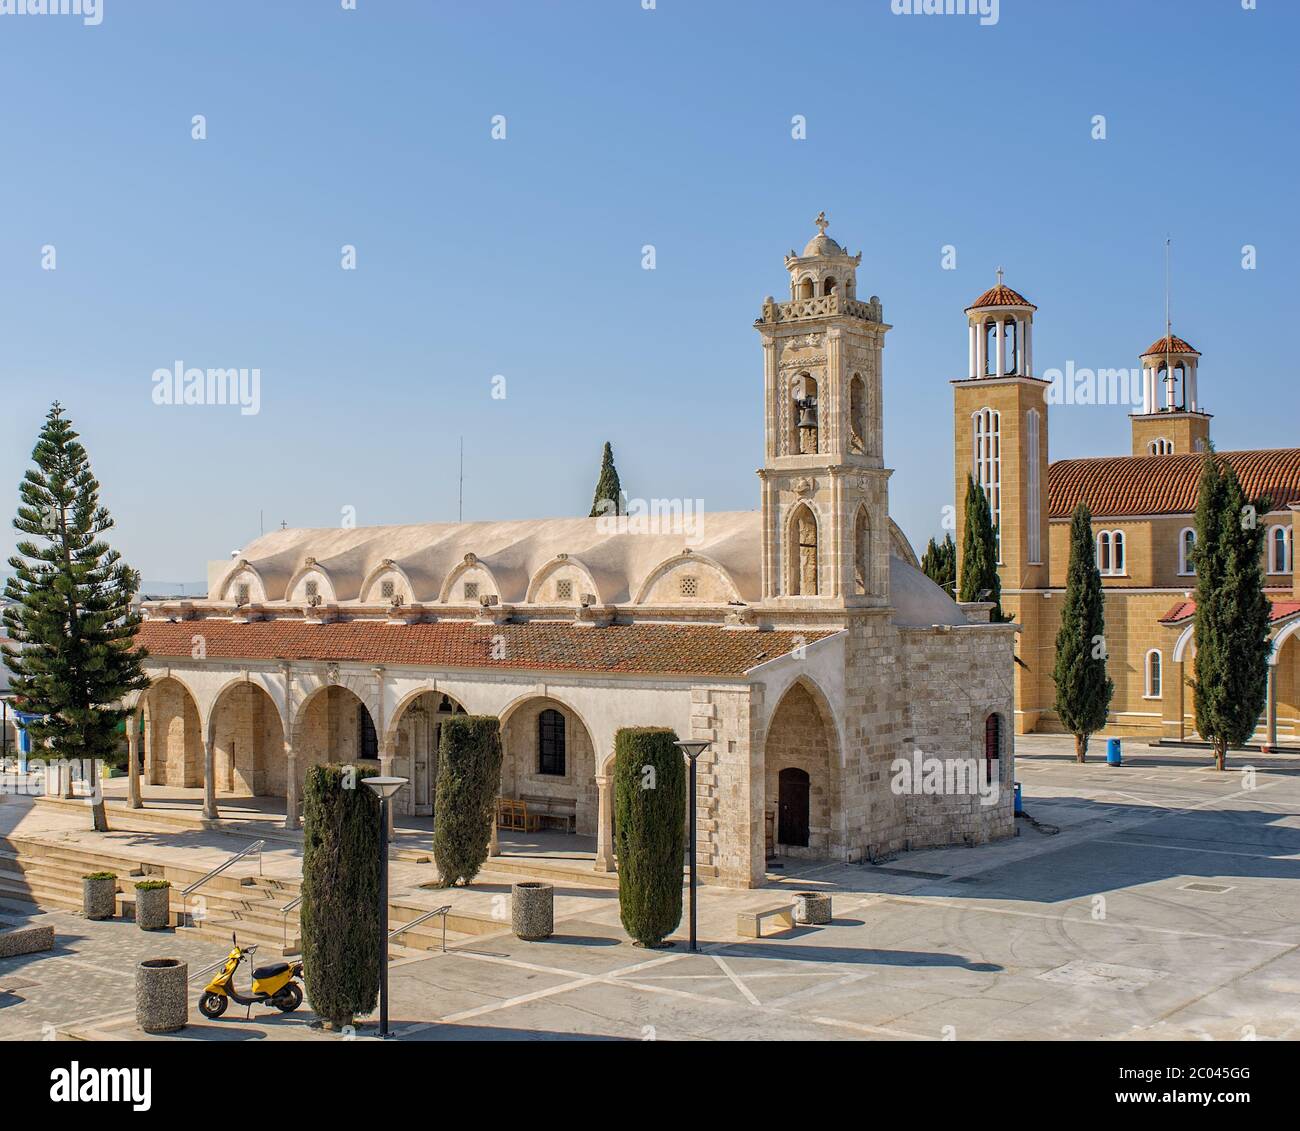 Churches on central square of small town. Cyprus Stock Photo